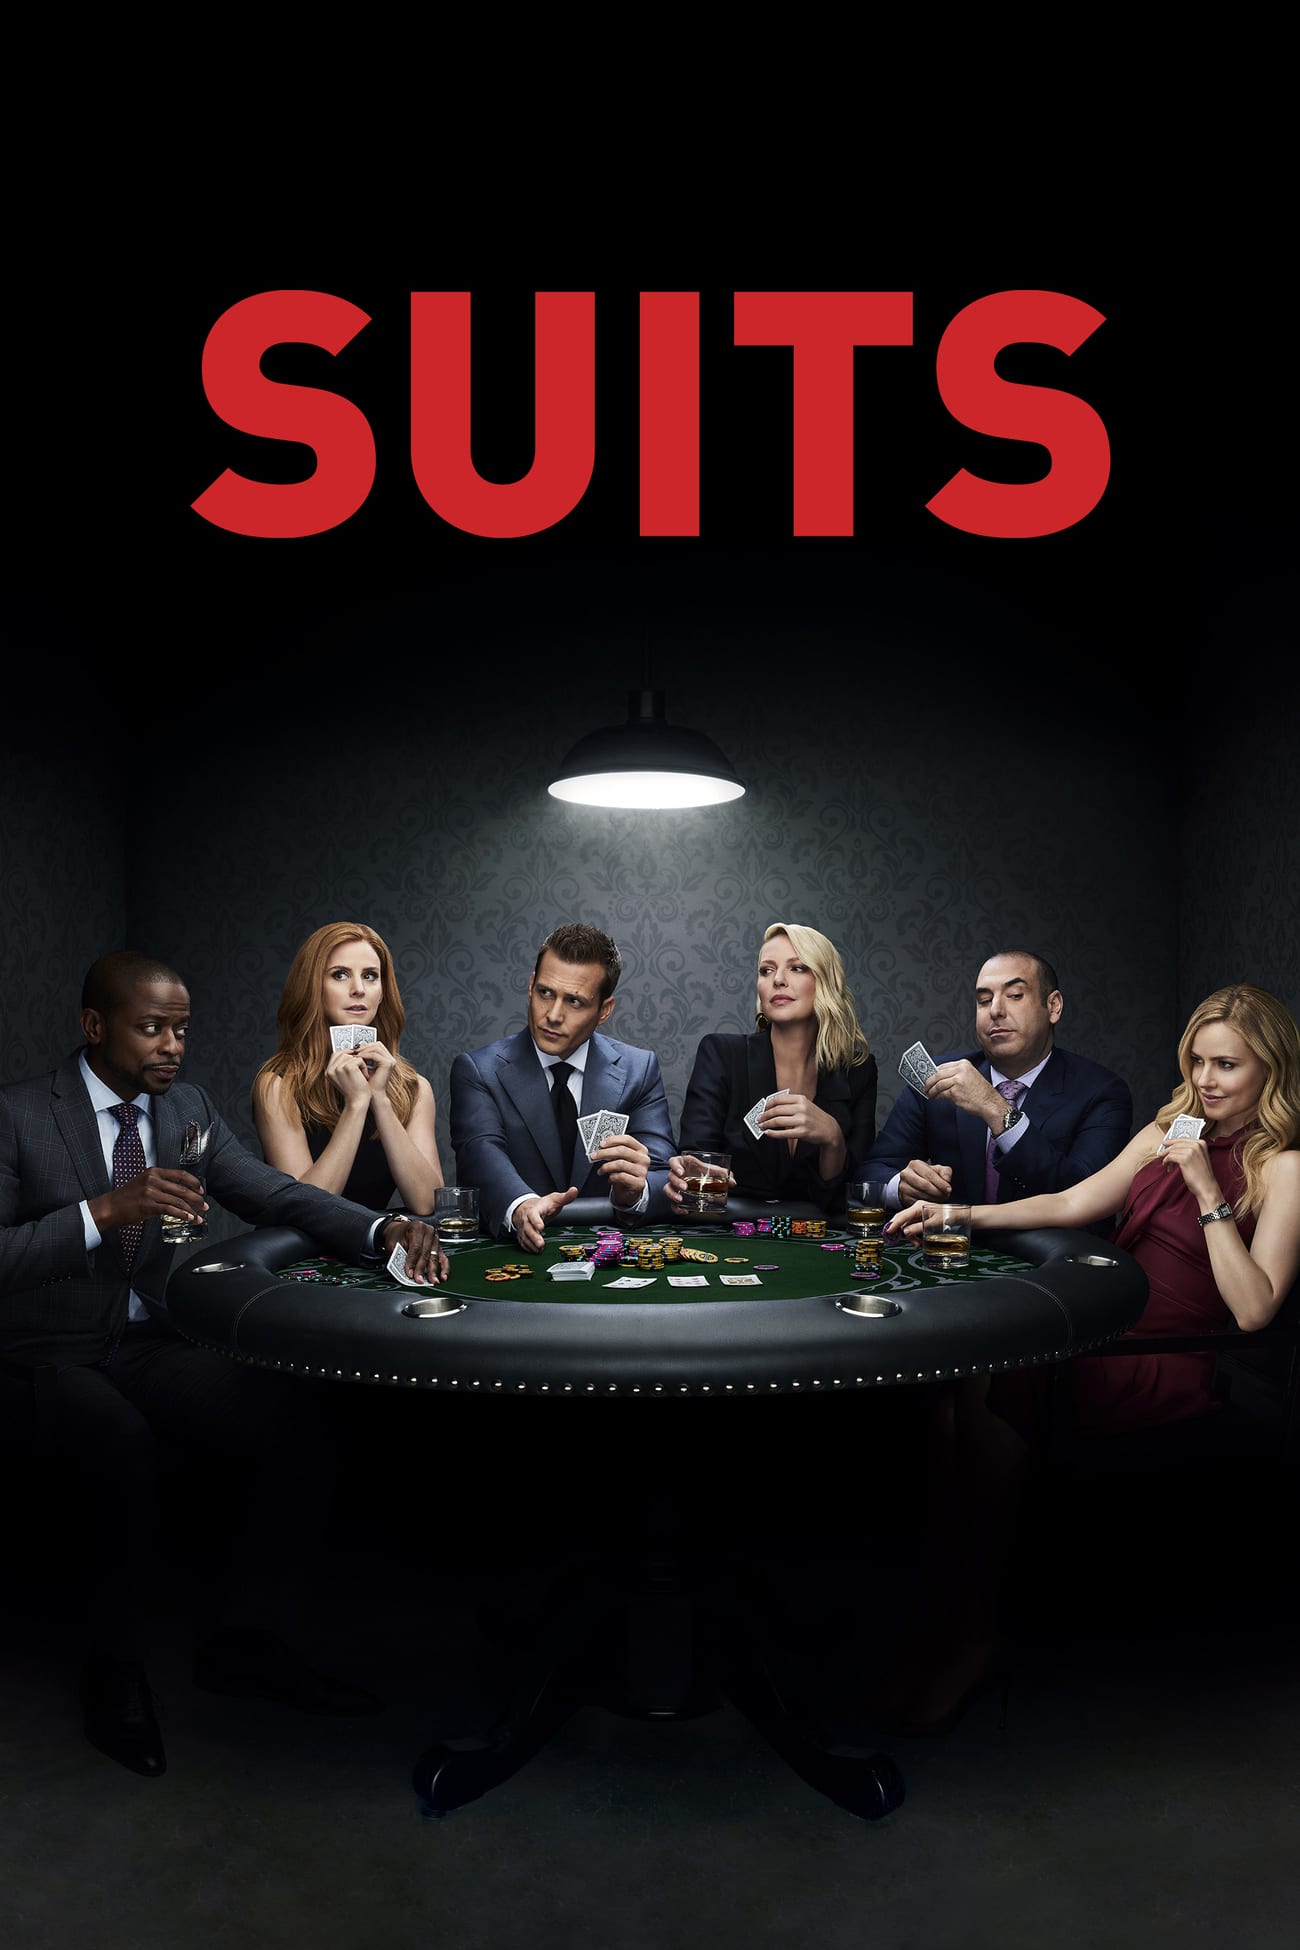 Poster for Suits